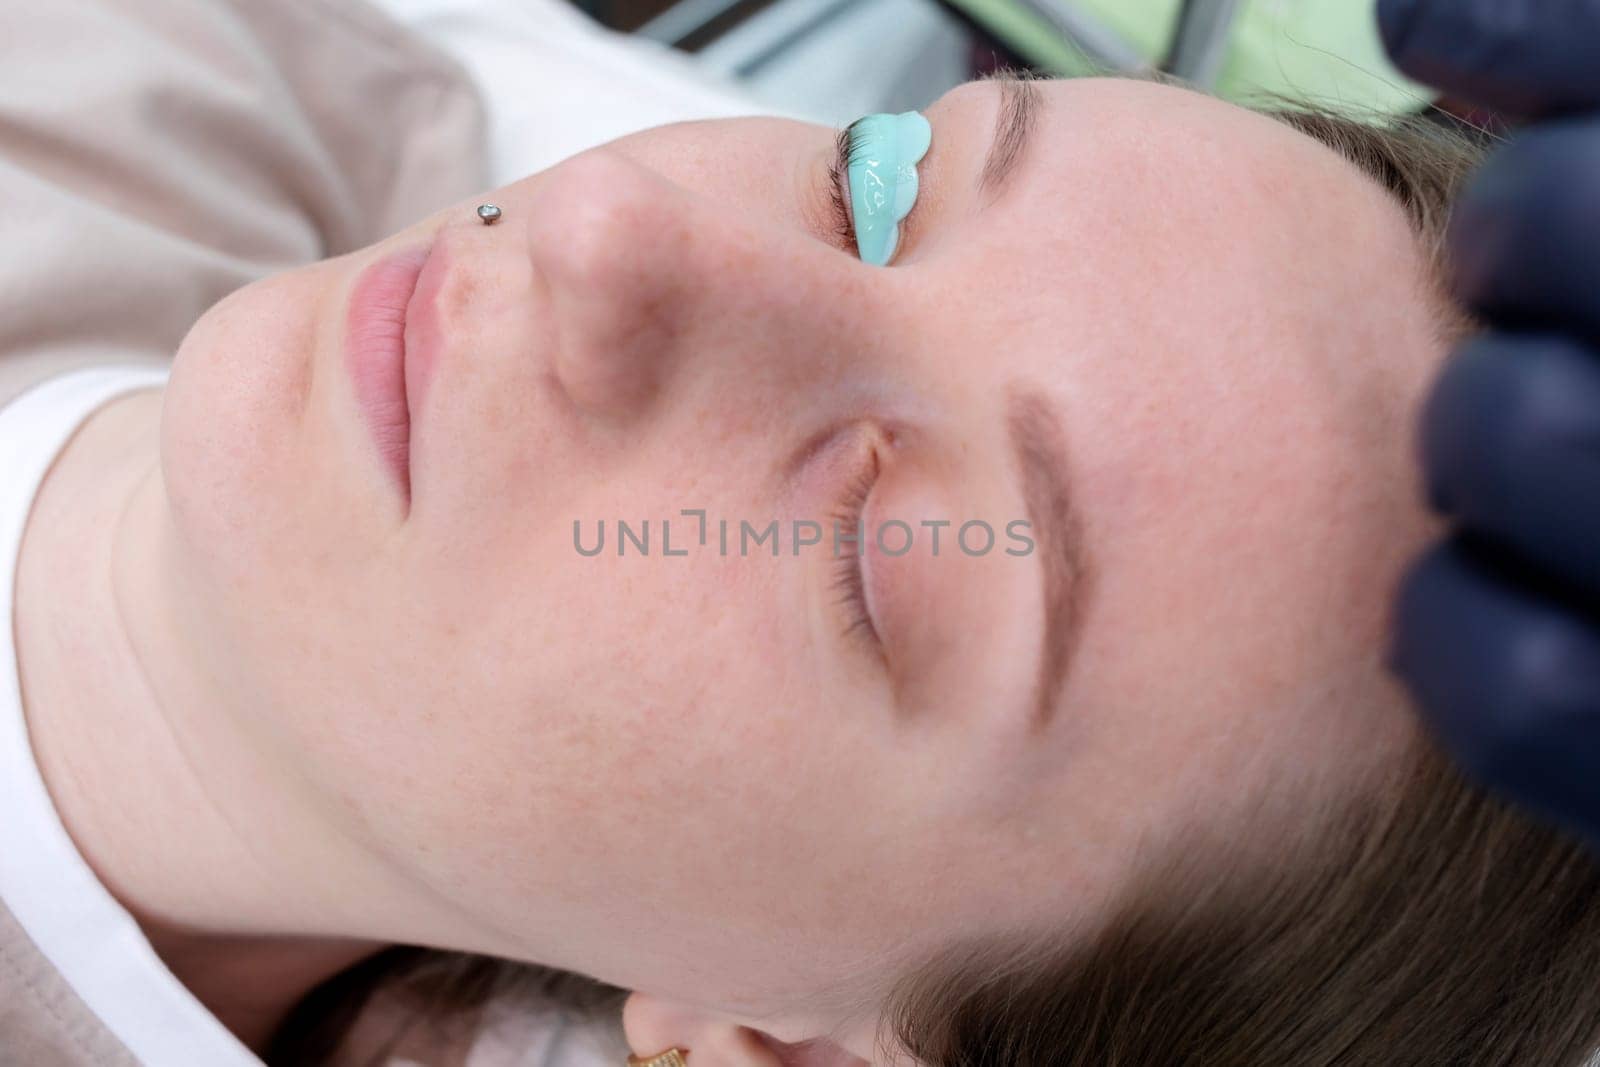 Closeup Face Of White Woman With Laminating Eyelash, Rolled Hair On Silicone Roller. Curling, Staining, Extension Procedures For Lashes. Horizontal Plane. Step By Step. High Quality Photo